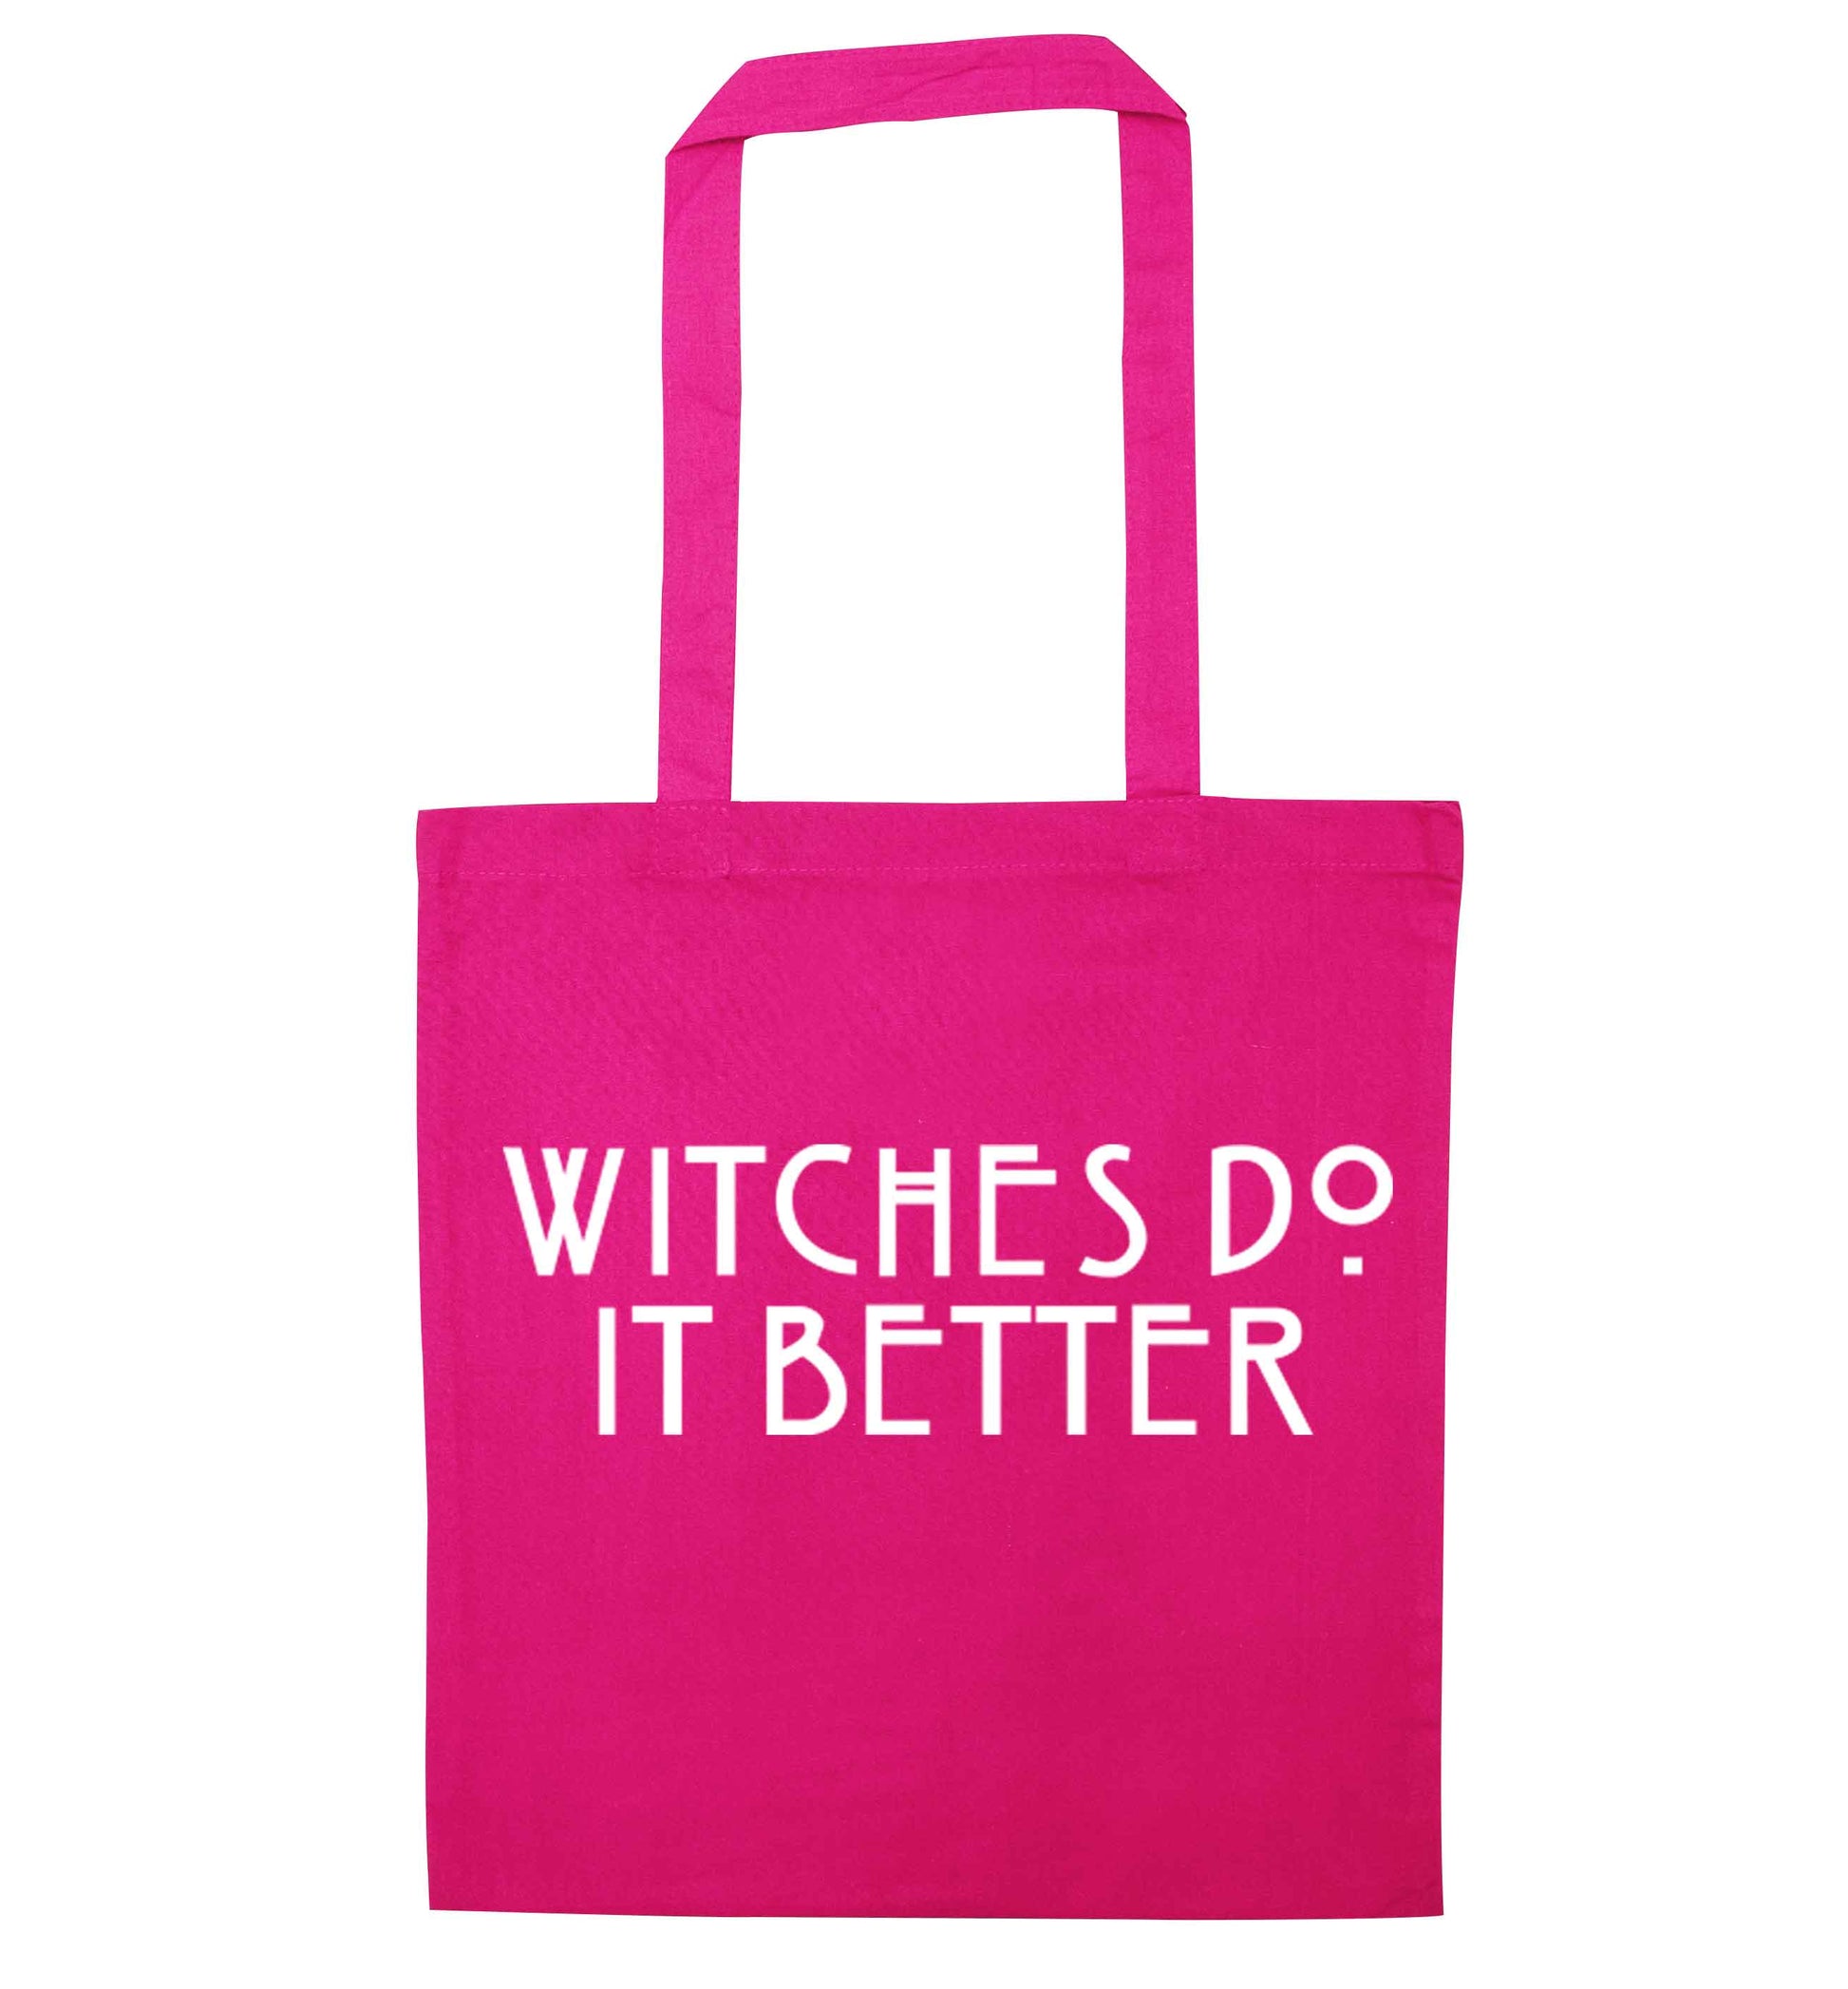 Witches do it better pink tote bag